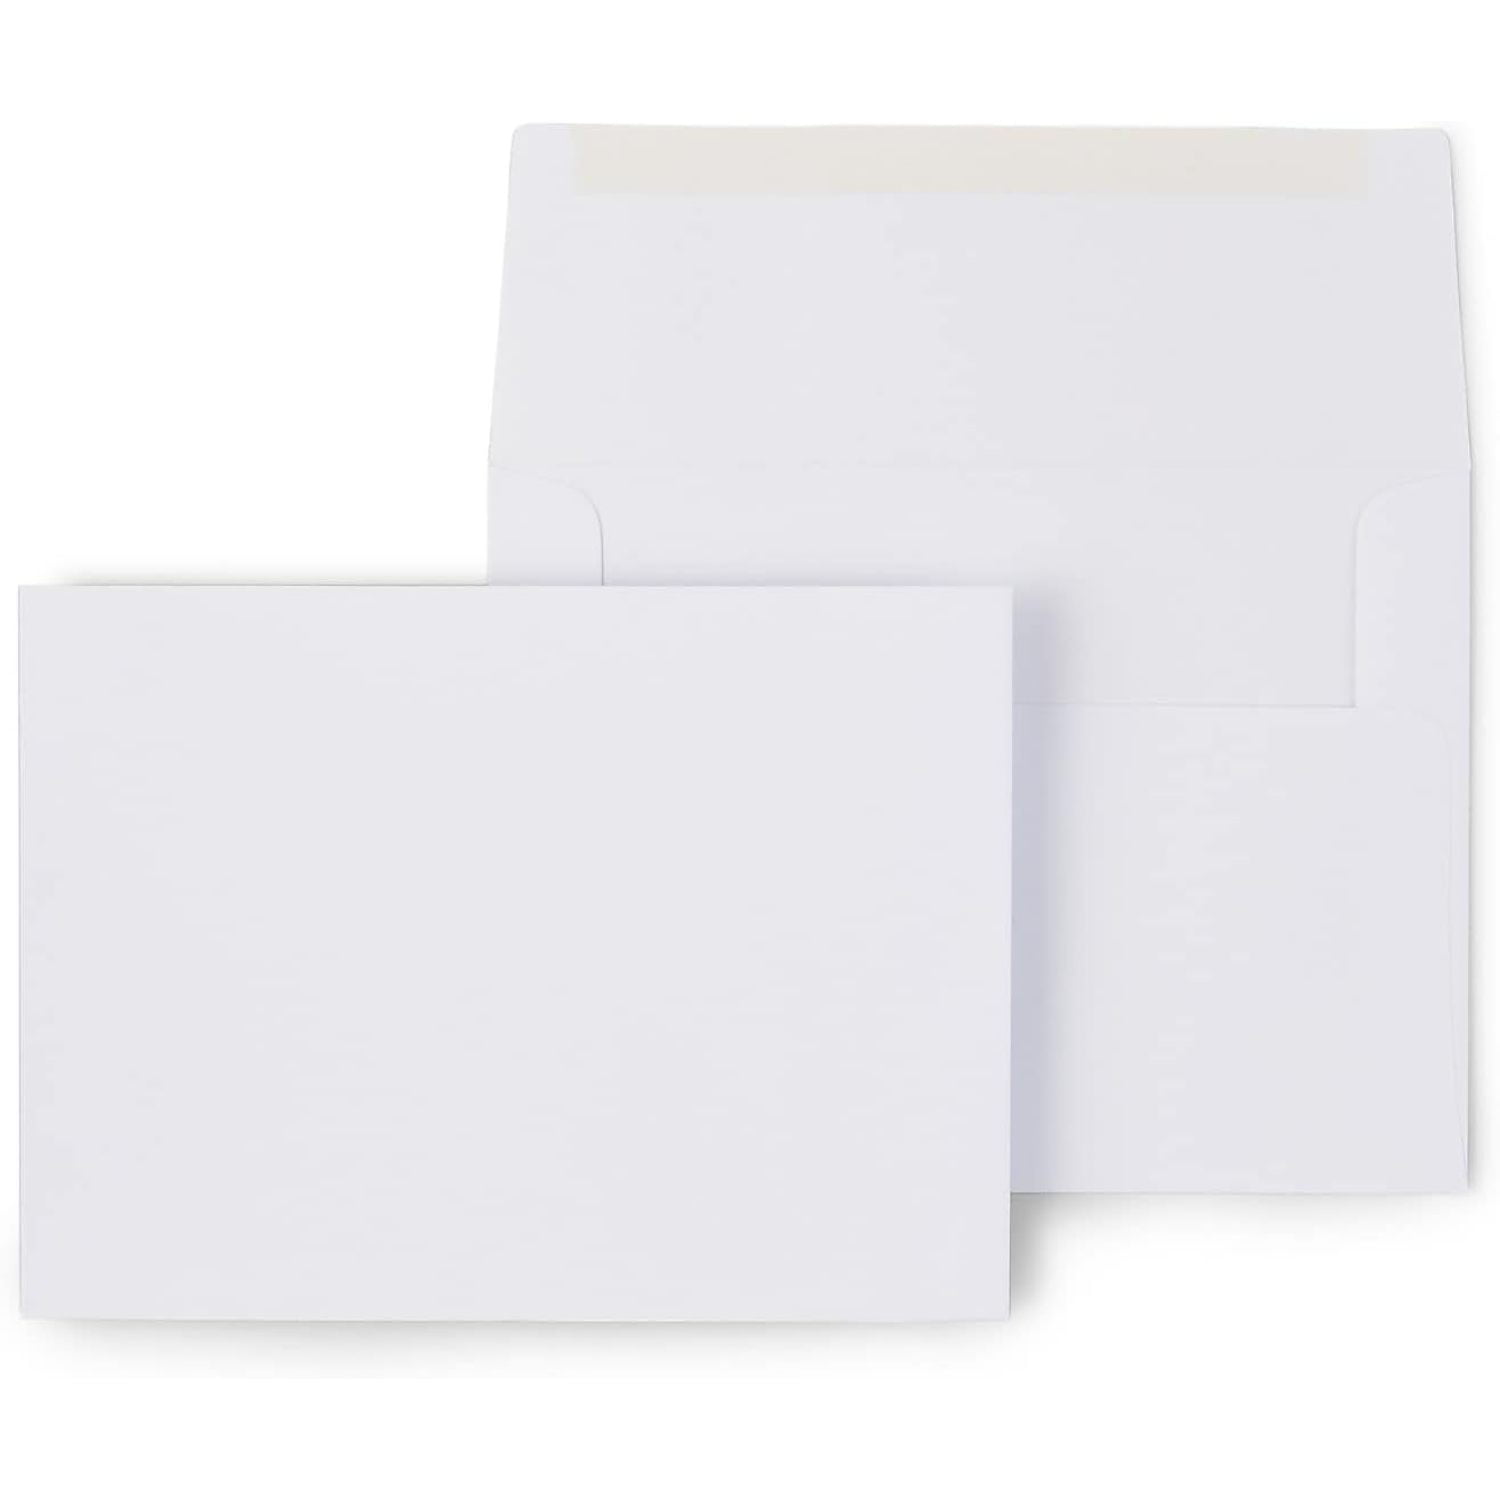 Envelopes for 4x6 Photos Cards 4 1/8 x 6 1/8 - 25ct Personalized